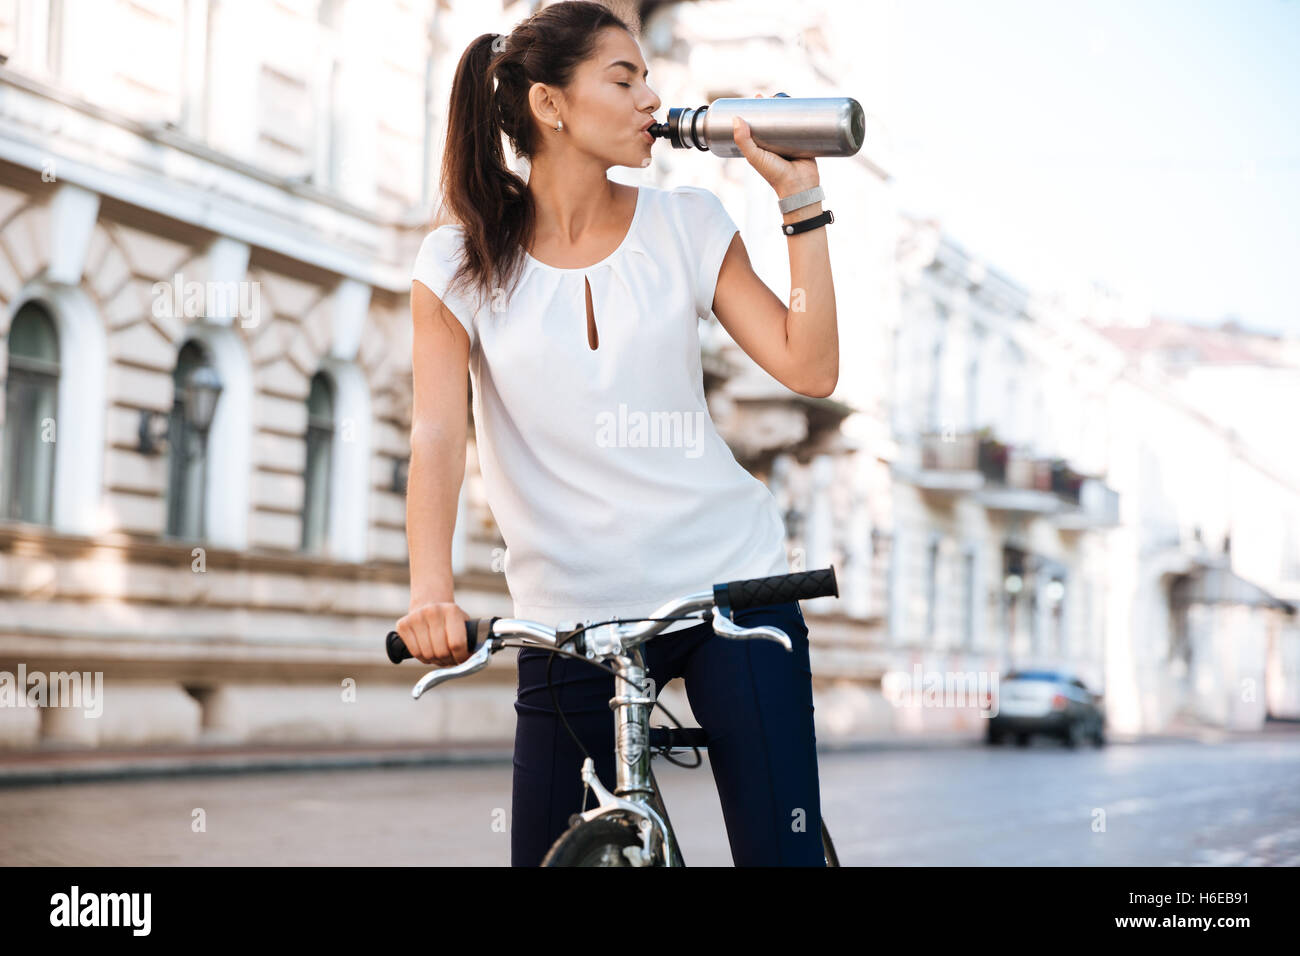 Young beautiful woman drinking water from the bottle while riding bicycle Stock Photo